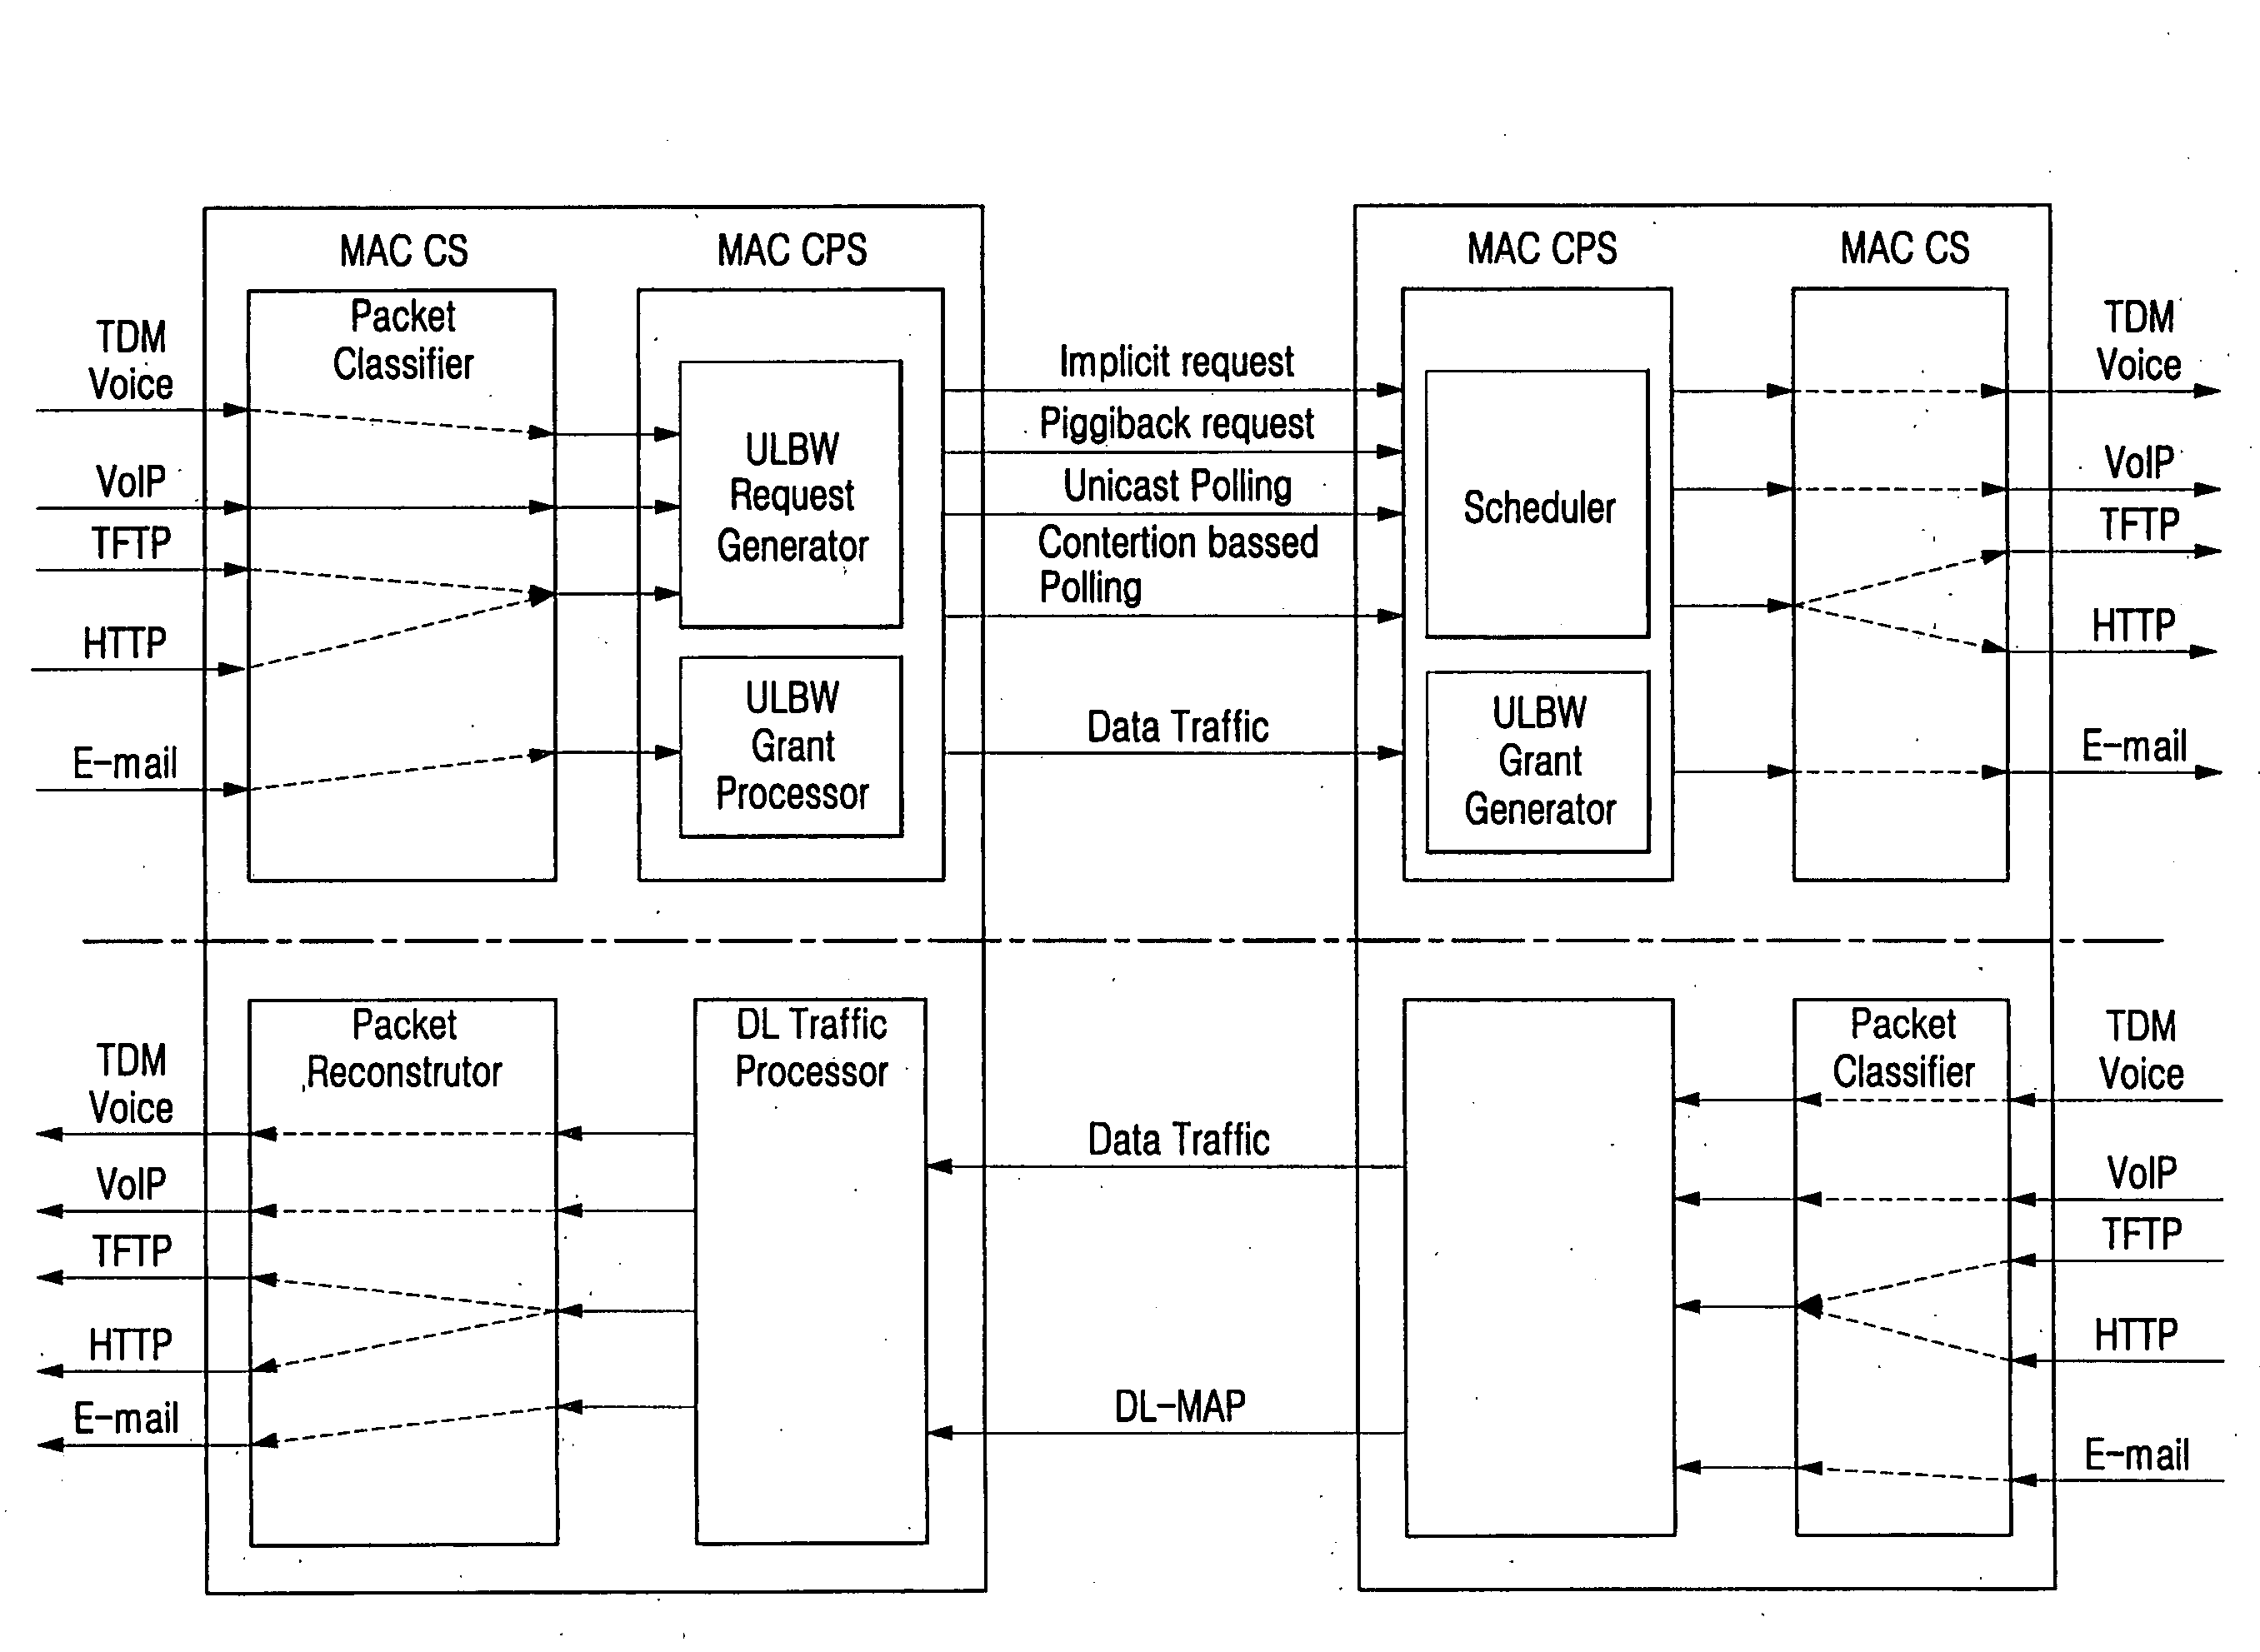 Wireless broadband (WiBro) station capable of supporting quality of service (QoS) and method for servicing QoS in WiBro network